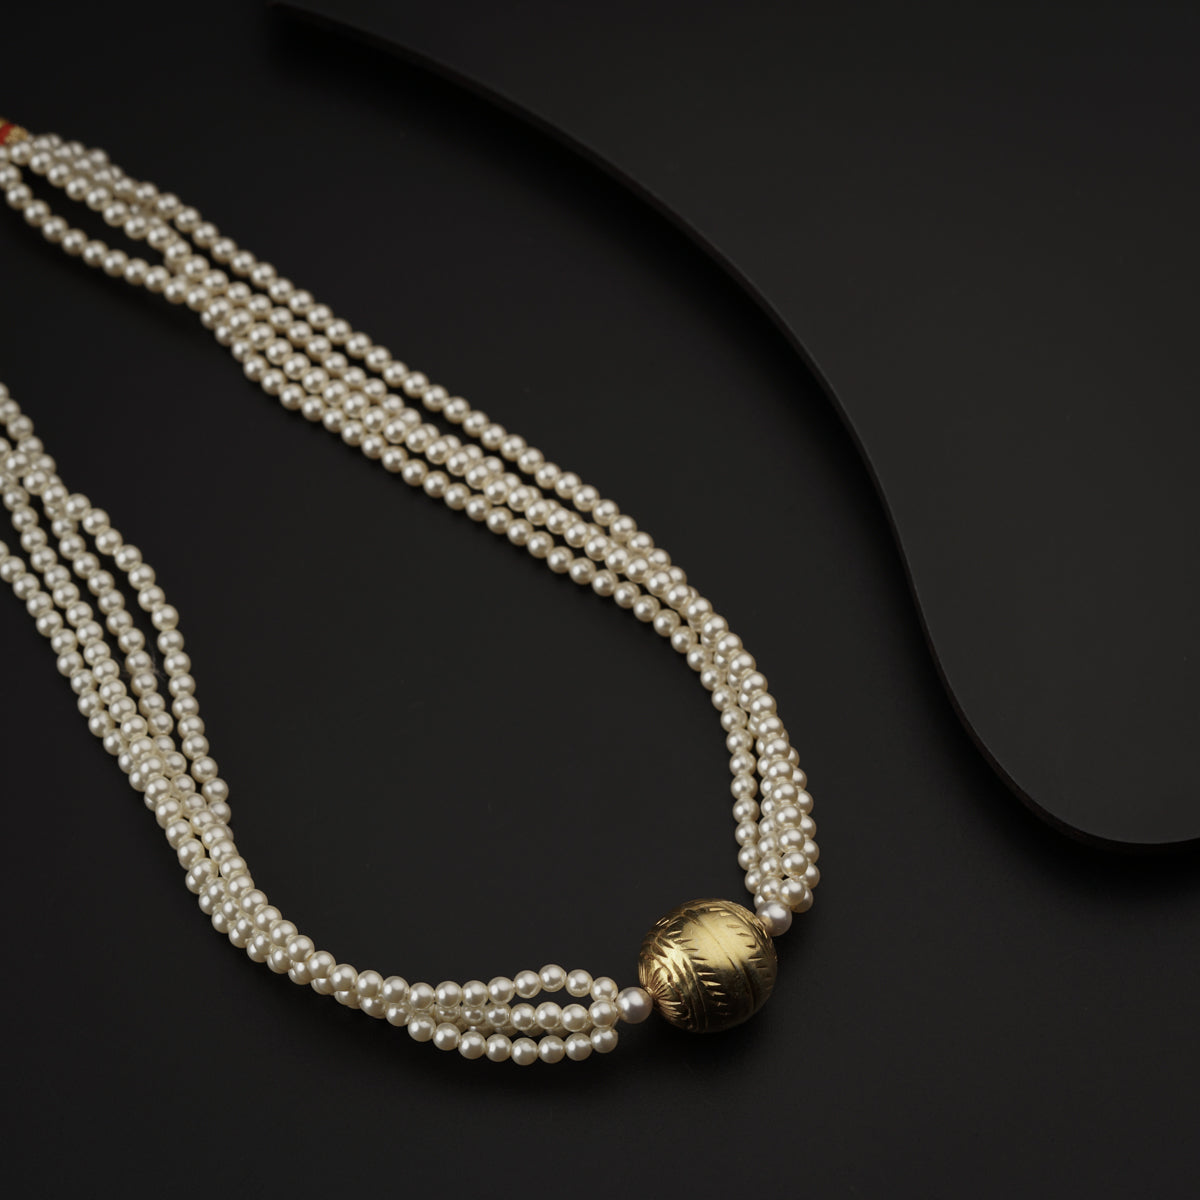 Textured Silver Beads Motif Necklace with Pearls Gold Plated